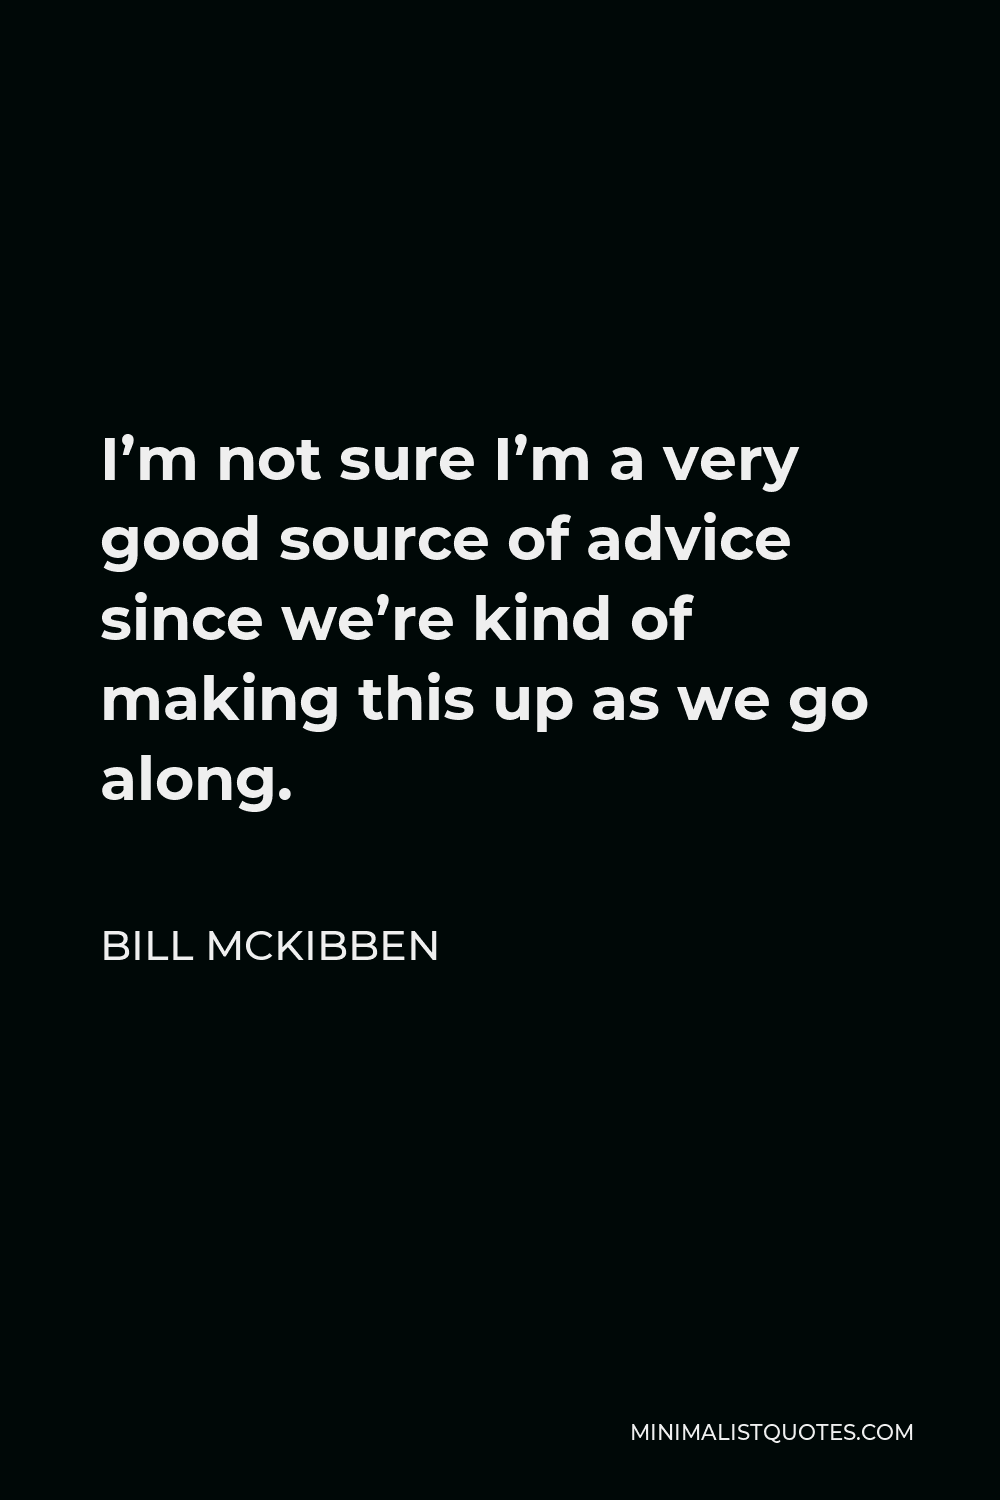 Bill McKibben Quote - I’m not sure I’m a very good source of advice since we’re kind of making this up as we go along.